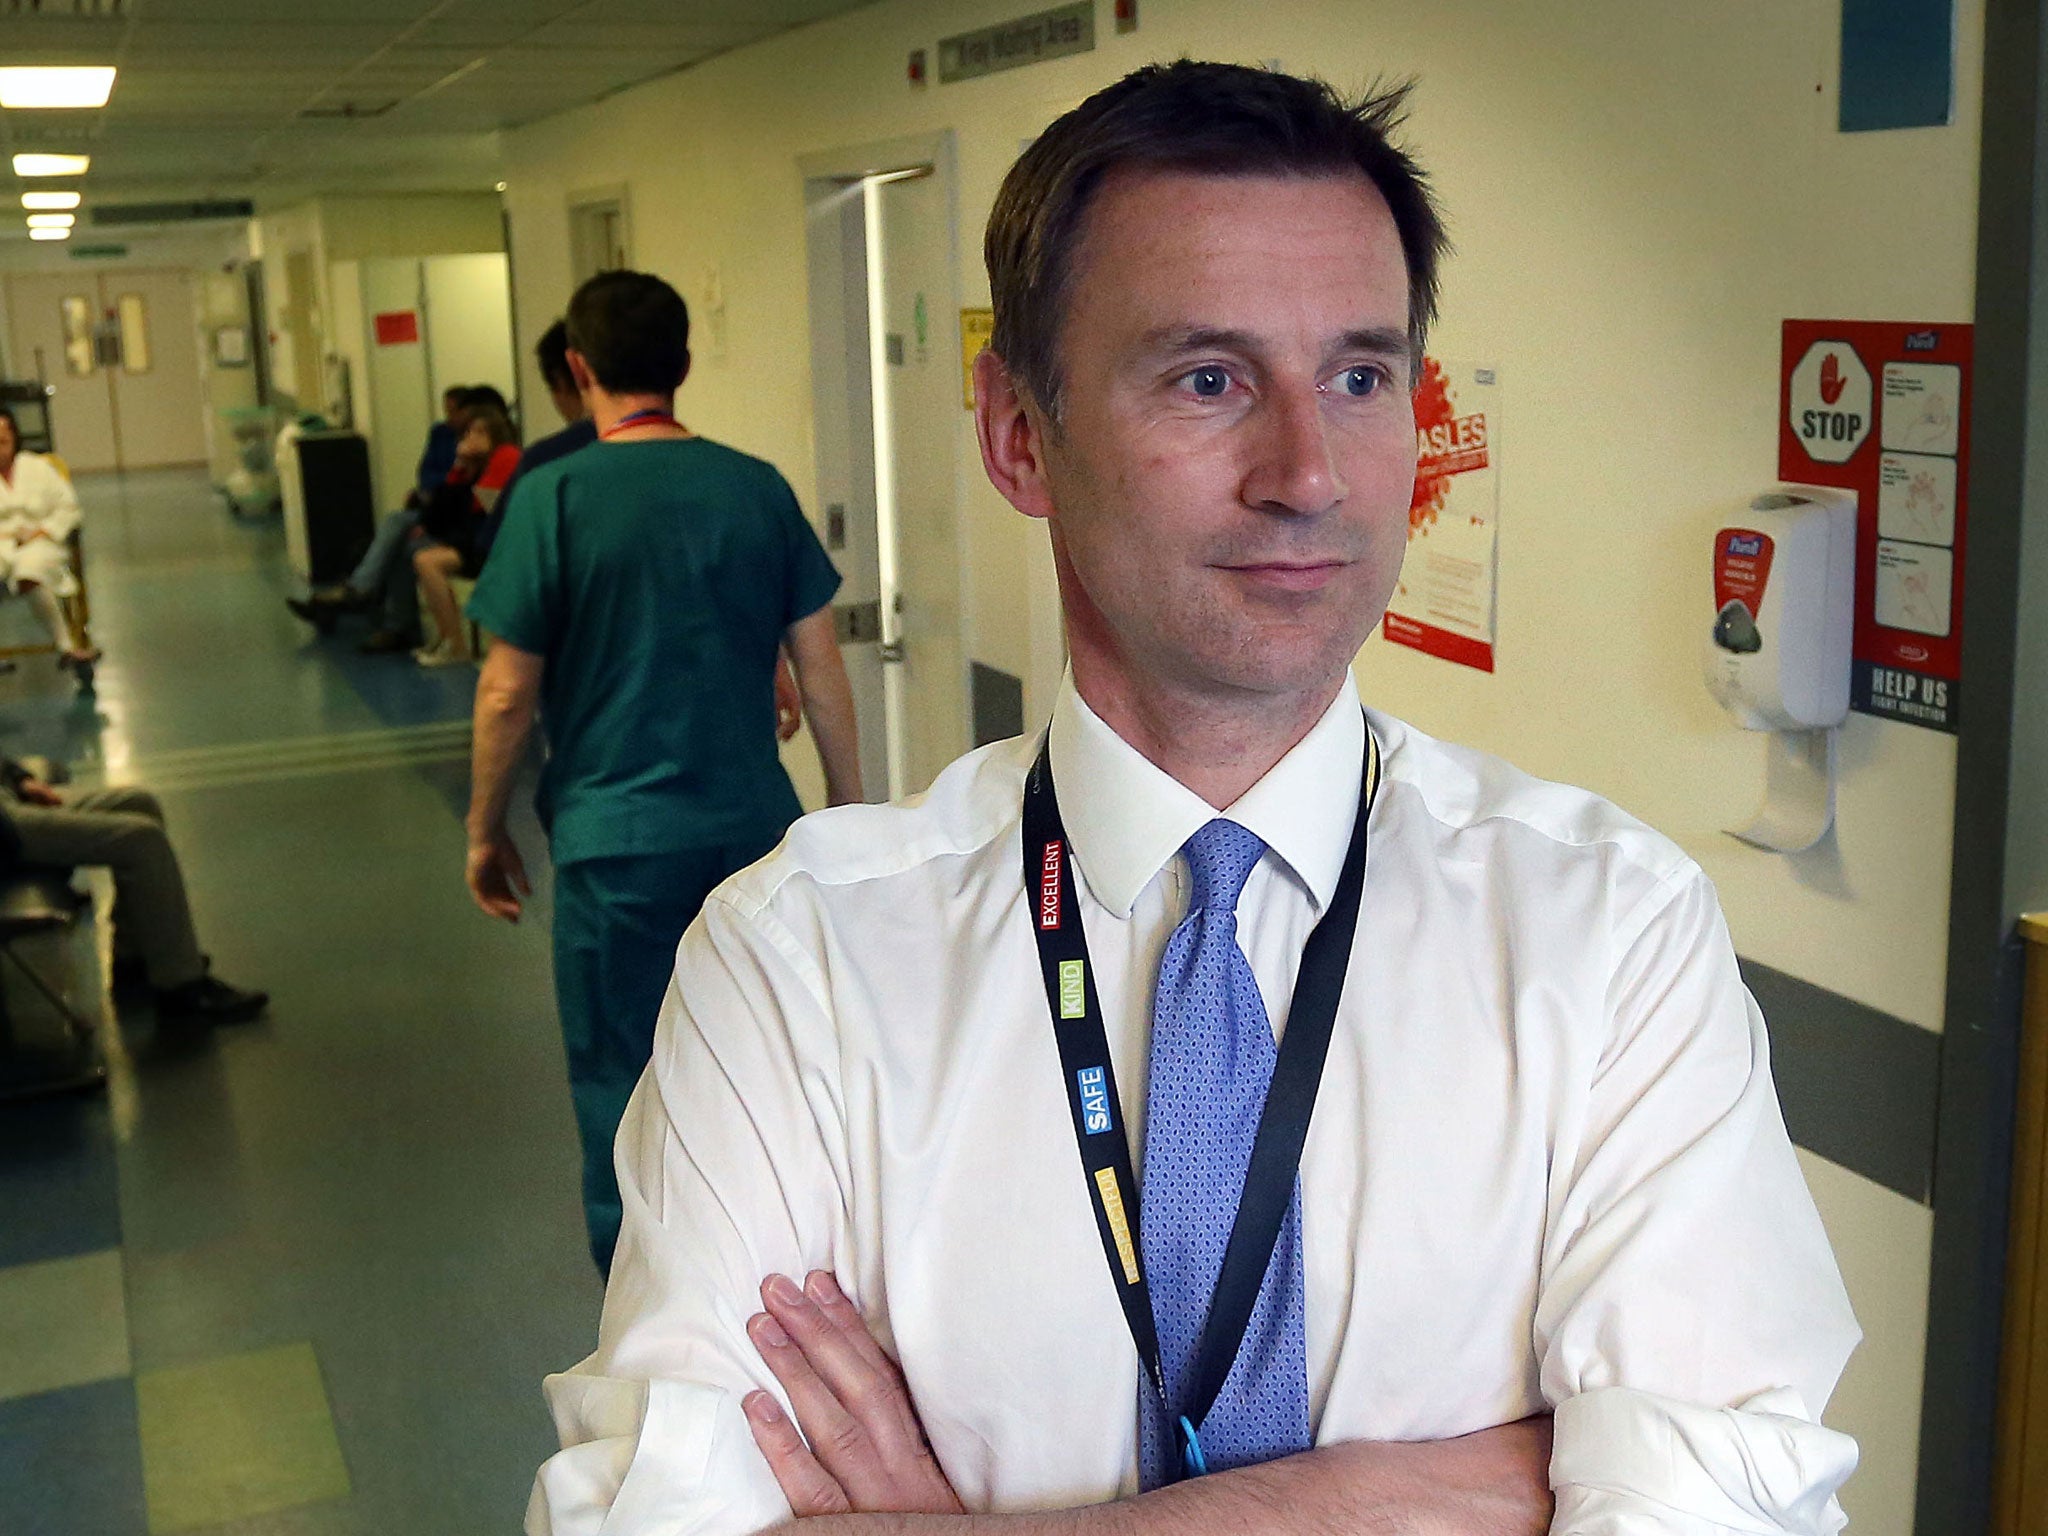 GPs have rejected Mr Hunt's suggestions that their failure to properly manage out-of-hours care has been responsible for increased demand at A&E